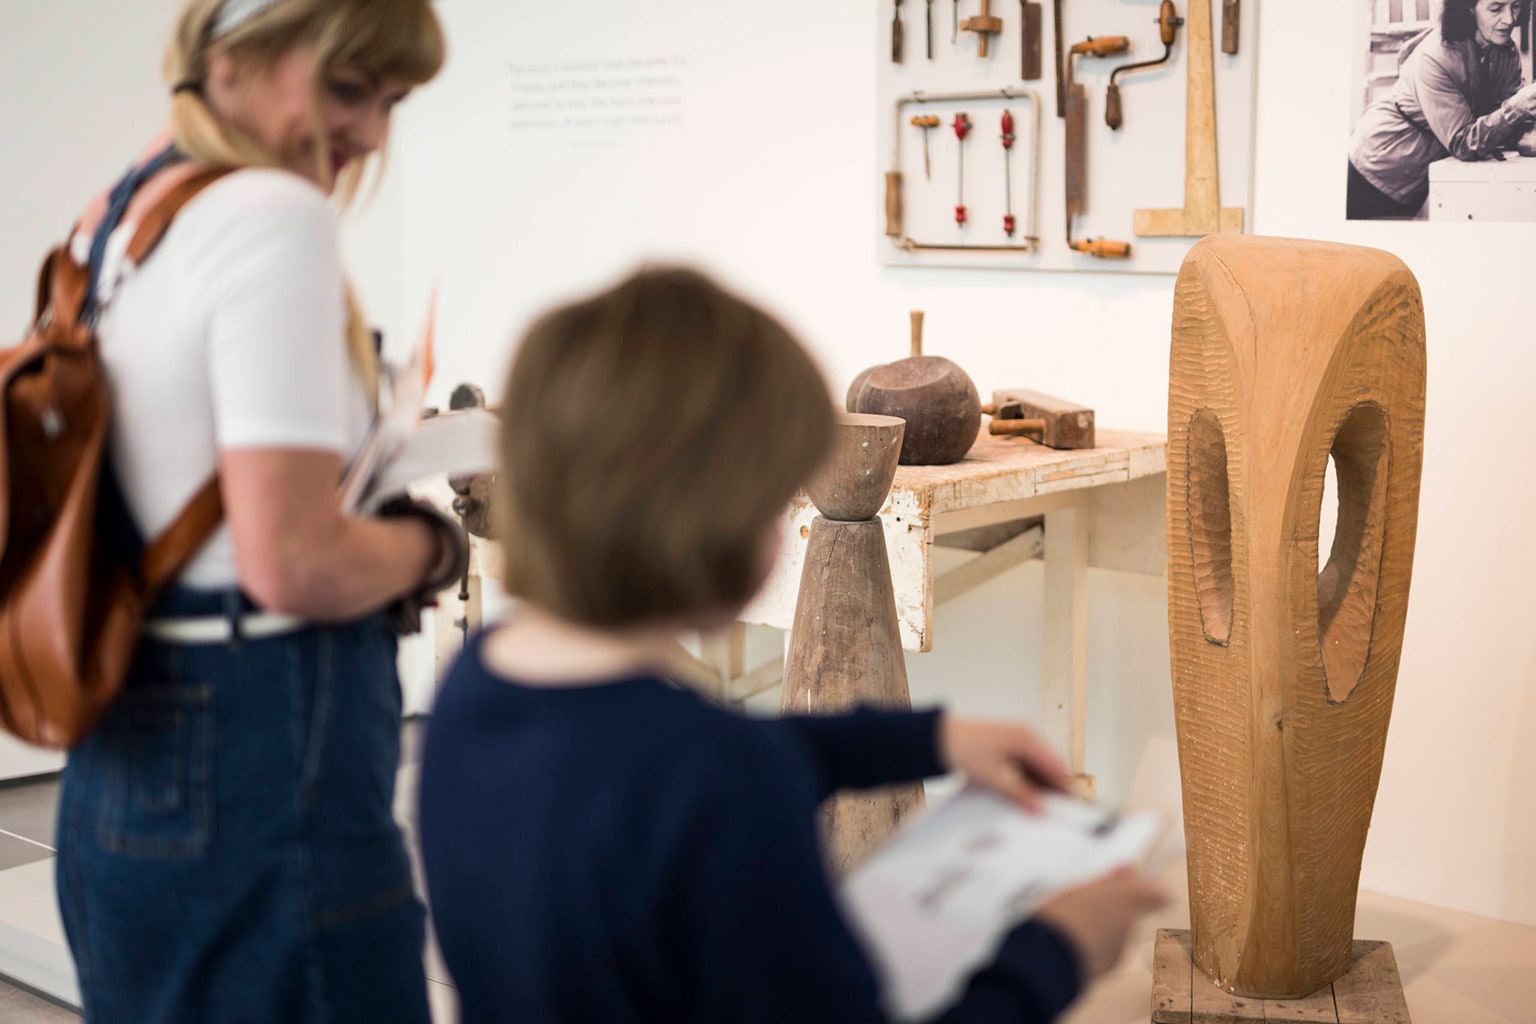 A parent and child at an explore and draw event put together at the Hepworth Wakefield. Photo by Nick Singleton.